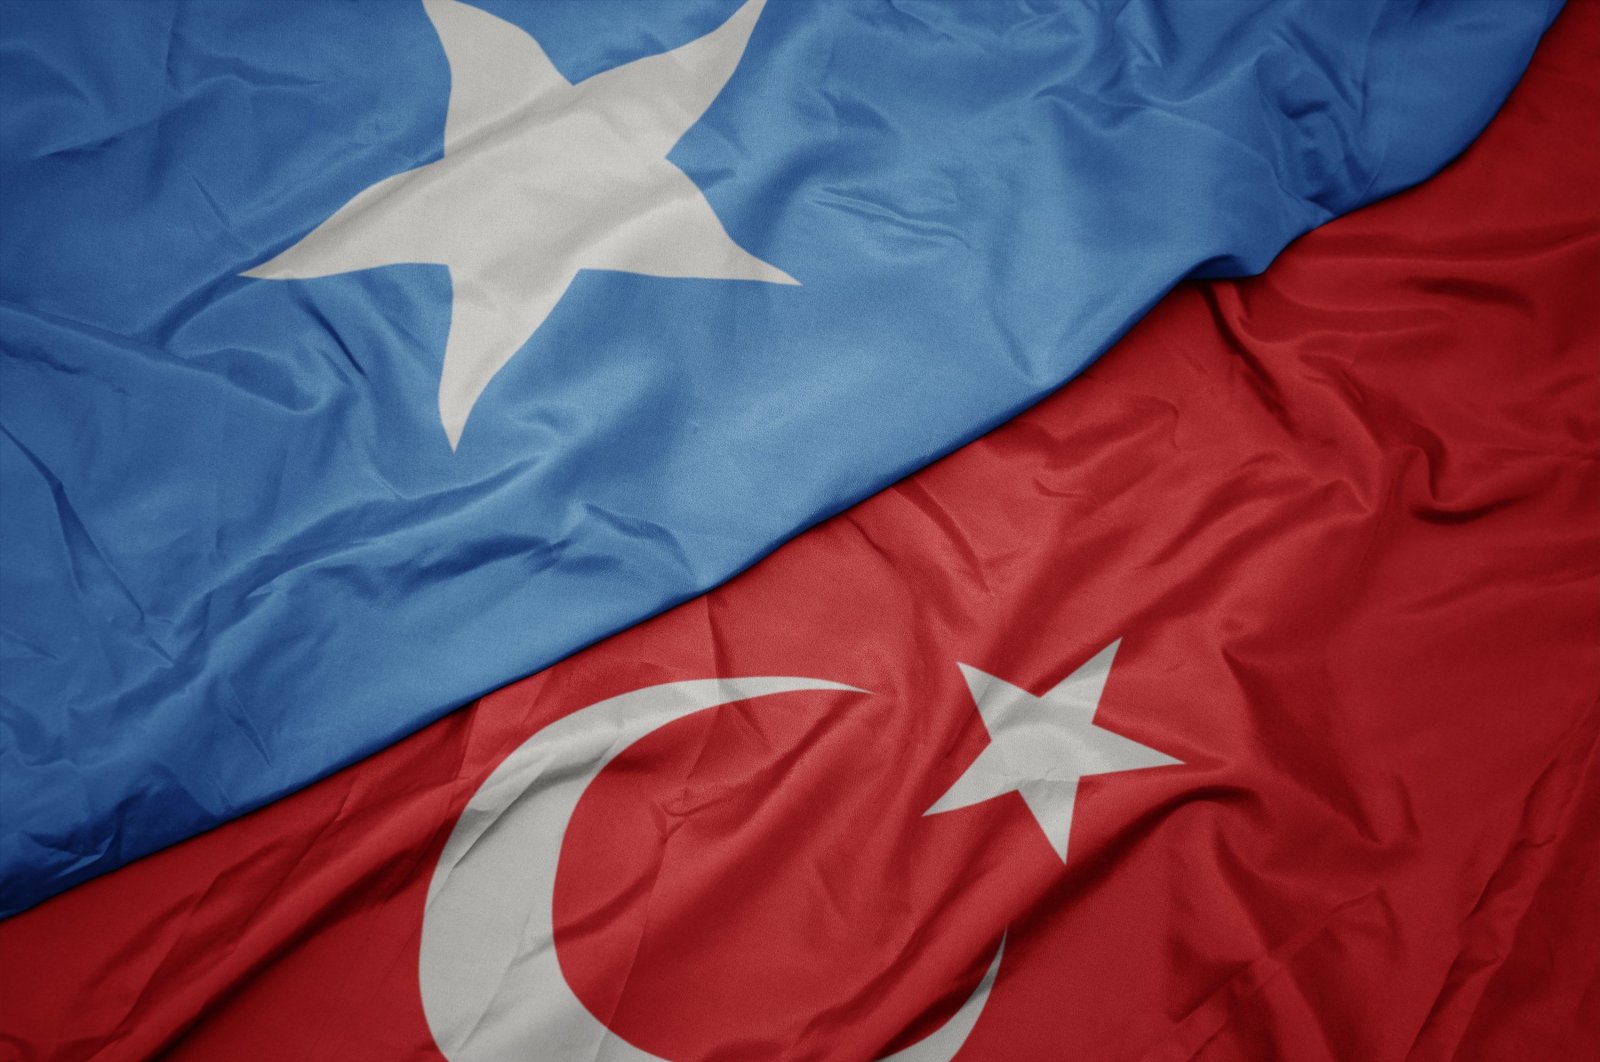 The flags of Somalia and Türkiye are seen together in this undated file photo. (Shutterstock Photo)